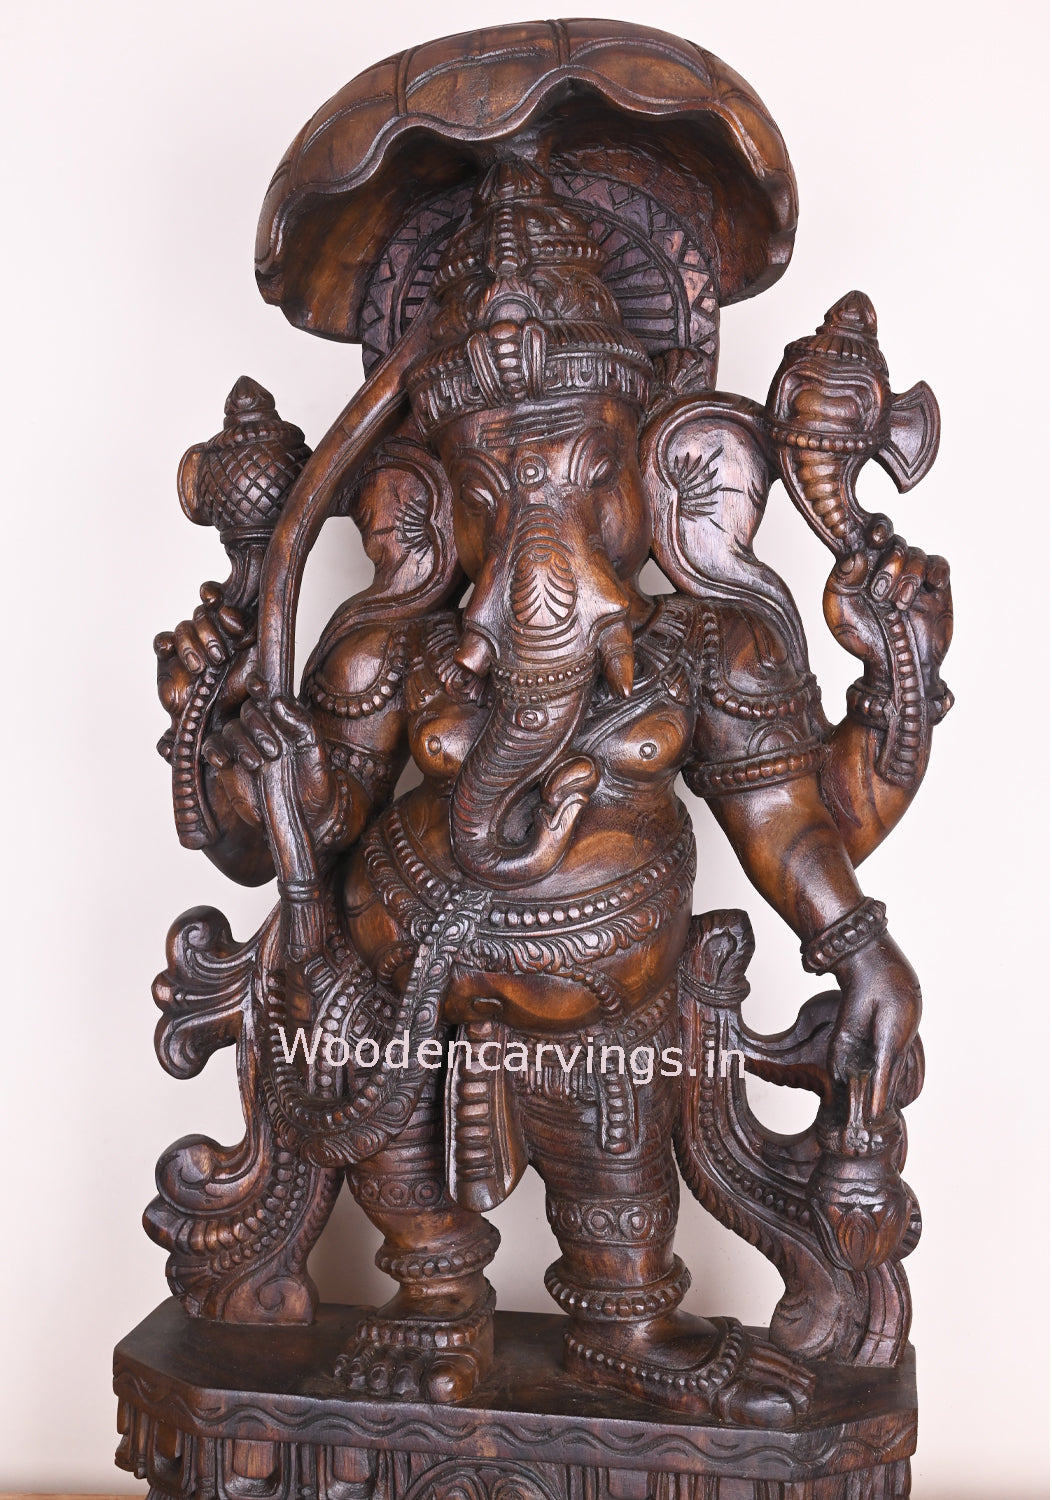 Remover of Obstacles Lord Ganapathi Holding Umbrella Standing on Base Wooden Handmade Sculpture 36"